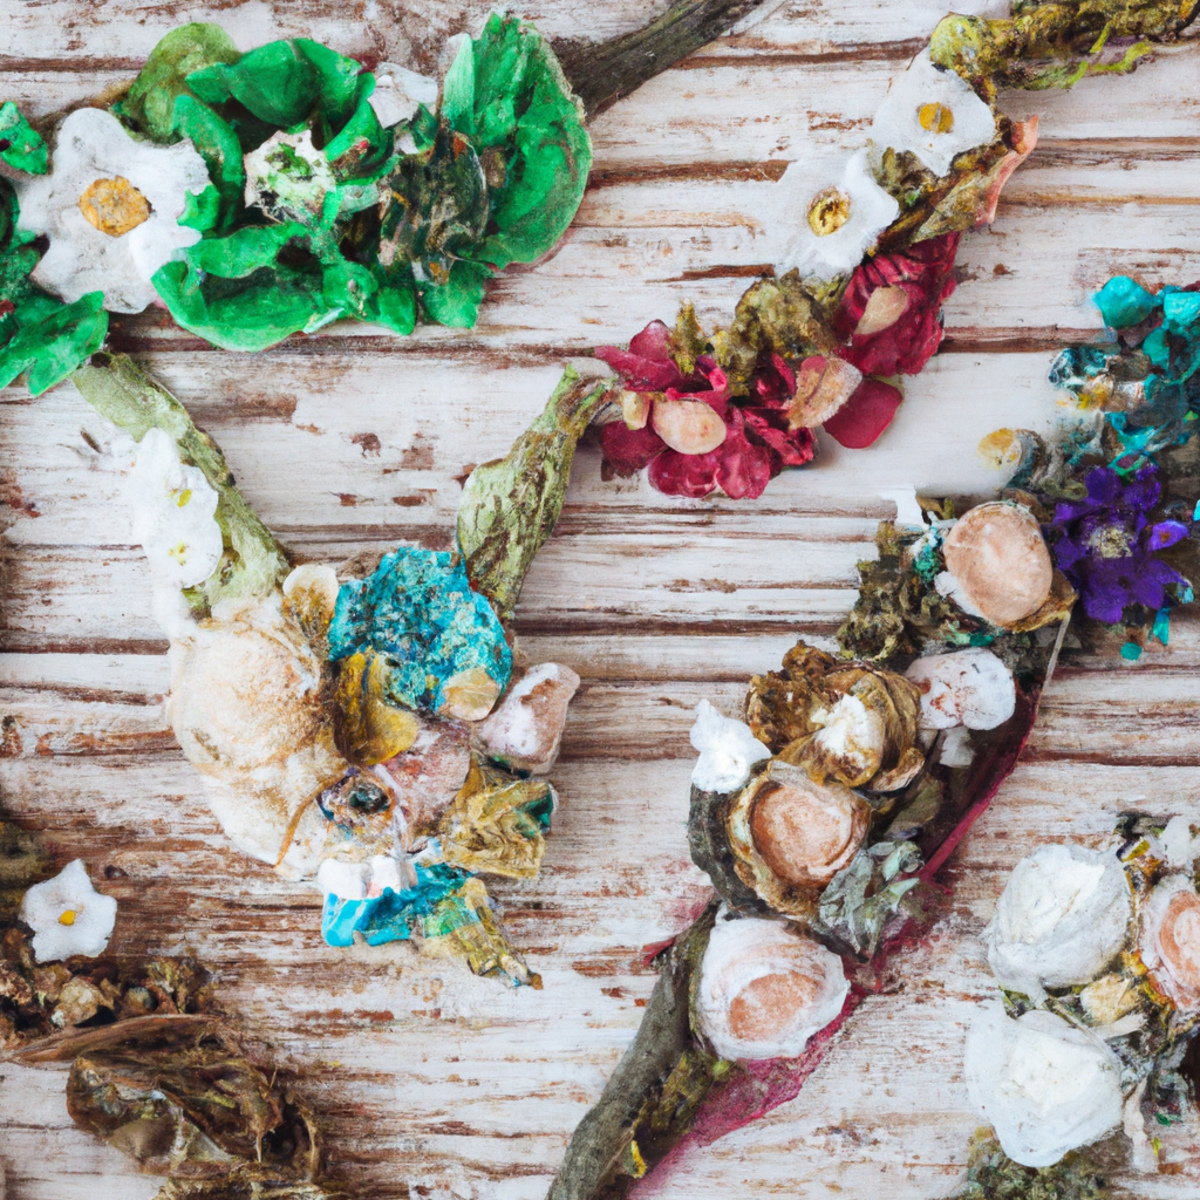 Vibrant boho hair flowers on rustic wood, showcasing intricate designs and colors. Soft lighting highlights textures and patterns.